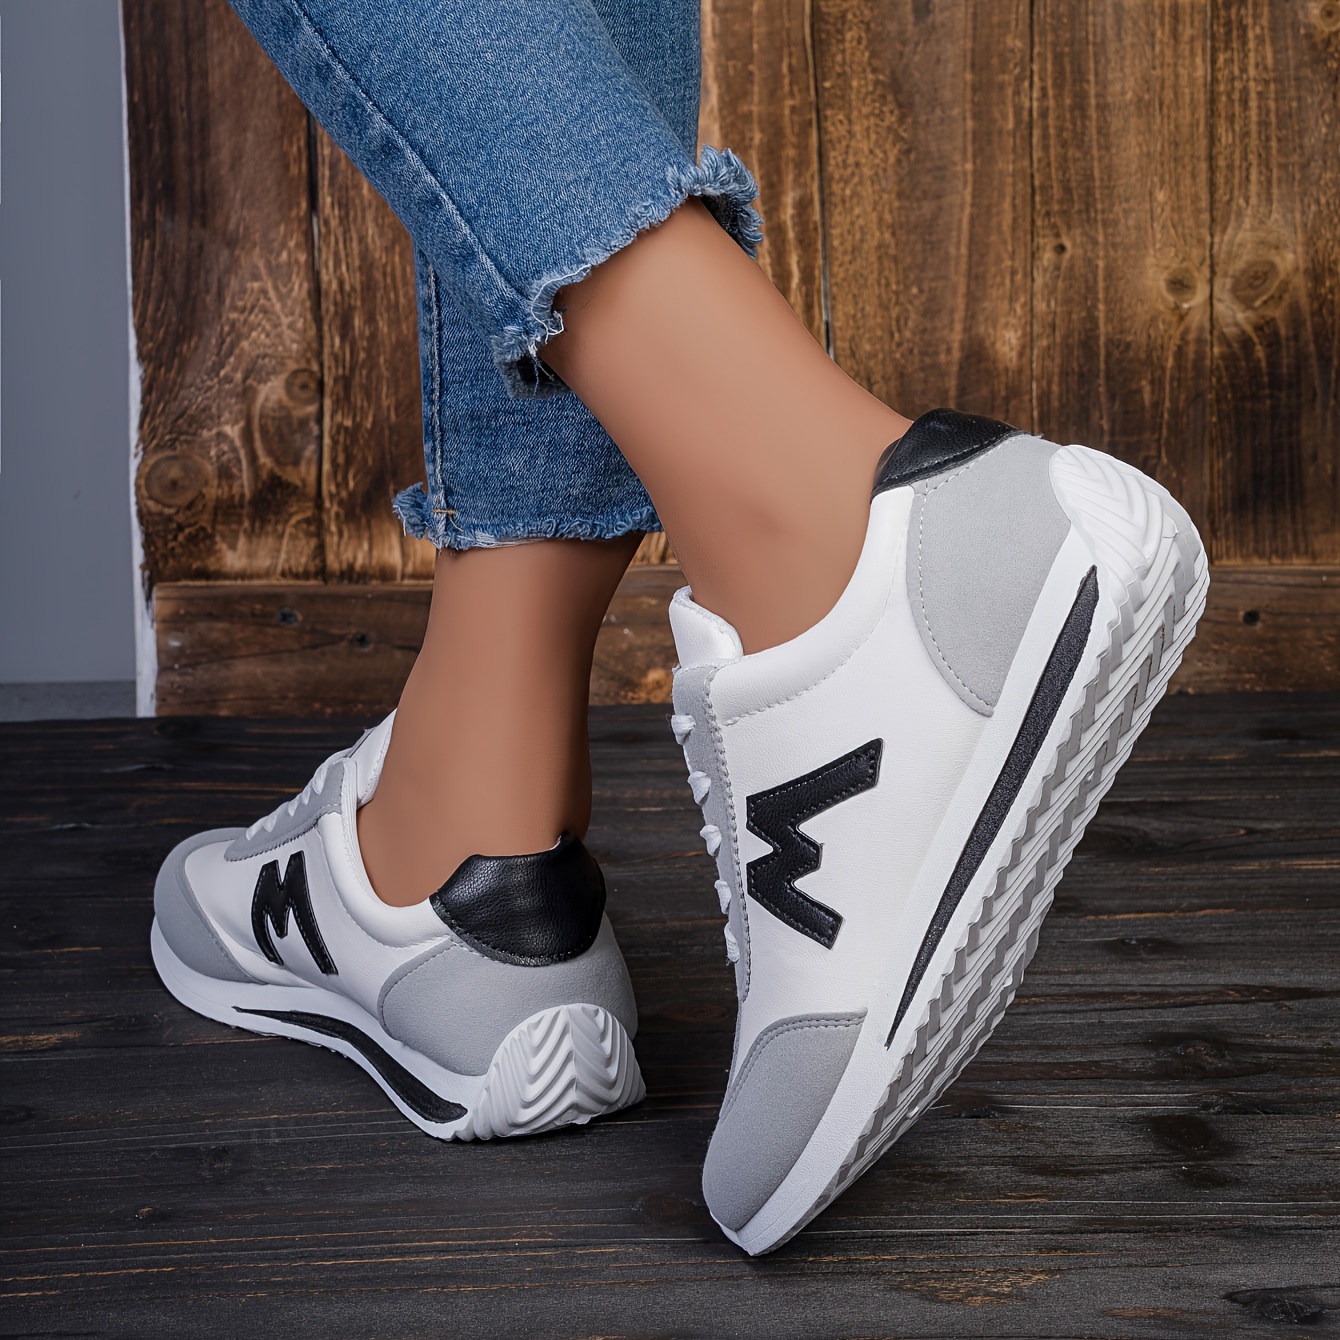 womens colorblock casual sneakers lace up soft sole platform walking shoes lightweight low top running shoes details 2